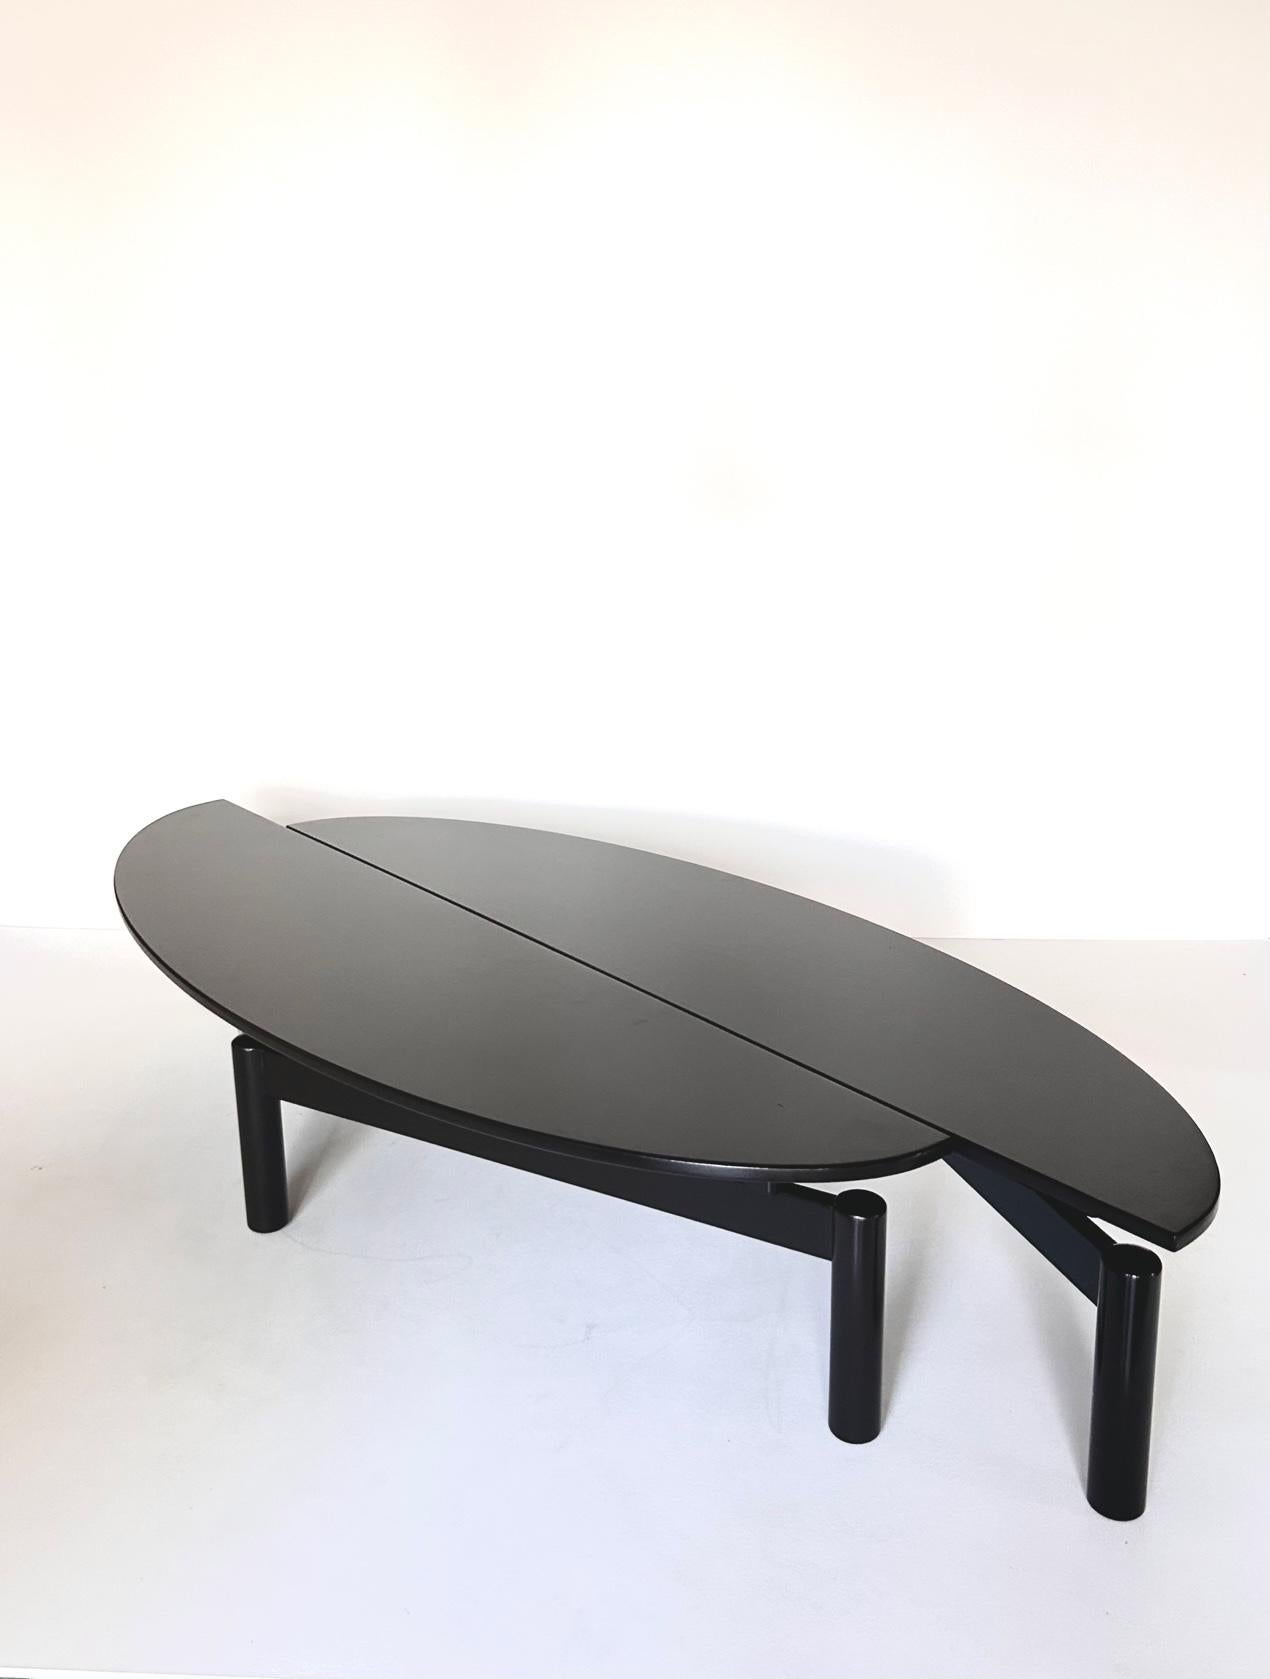 Late 20th Century Vico Magistretti Sinbad Coffee Table by Cassina, 1980's For Sale